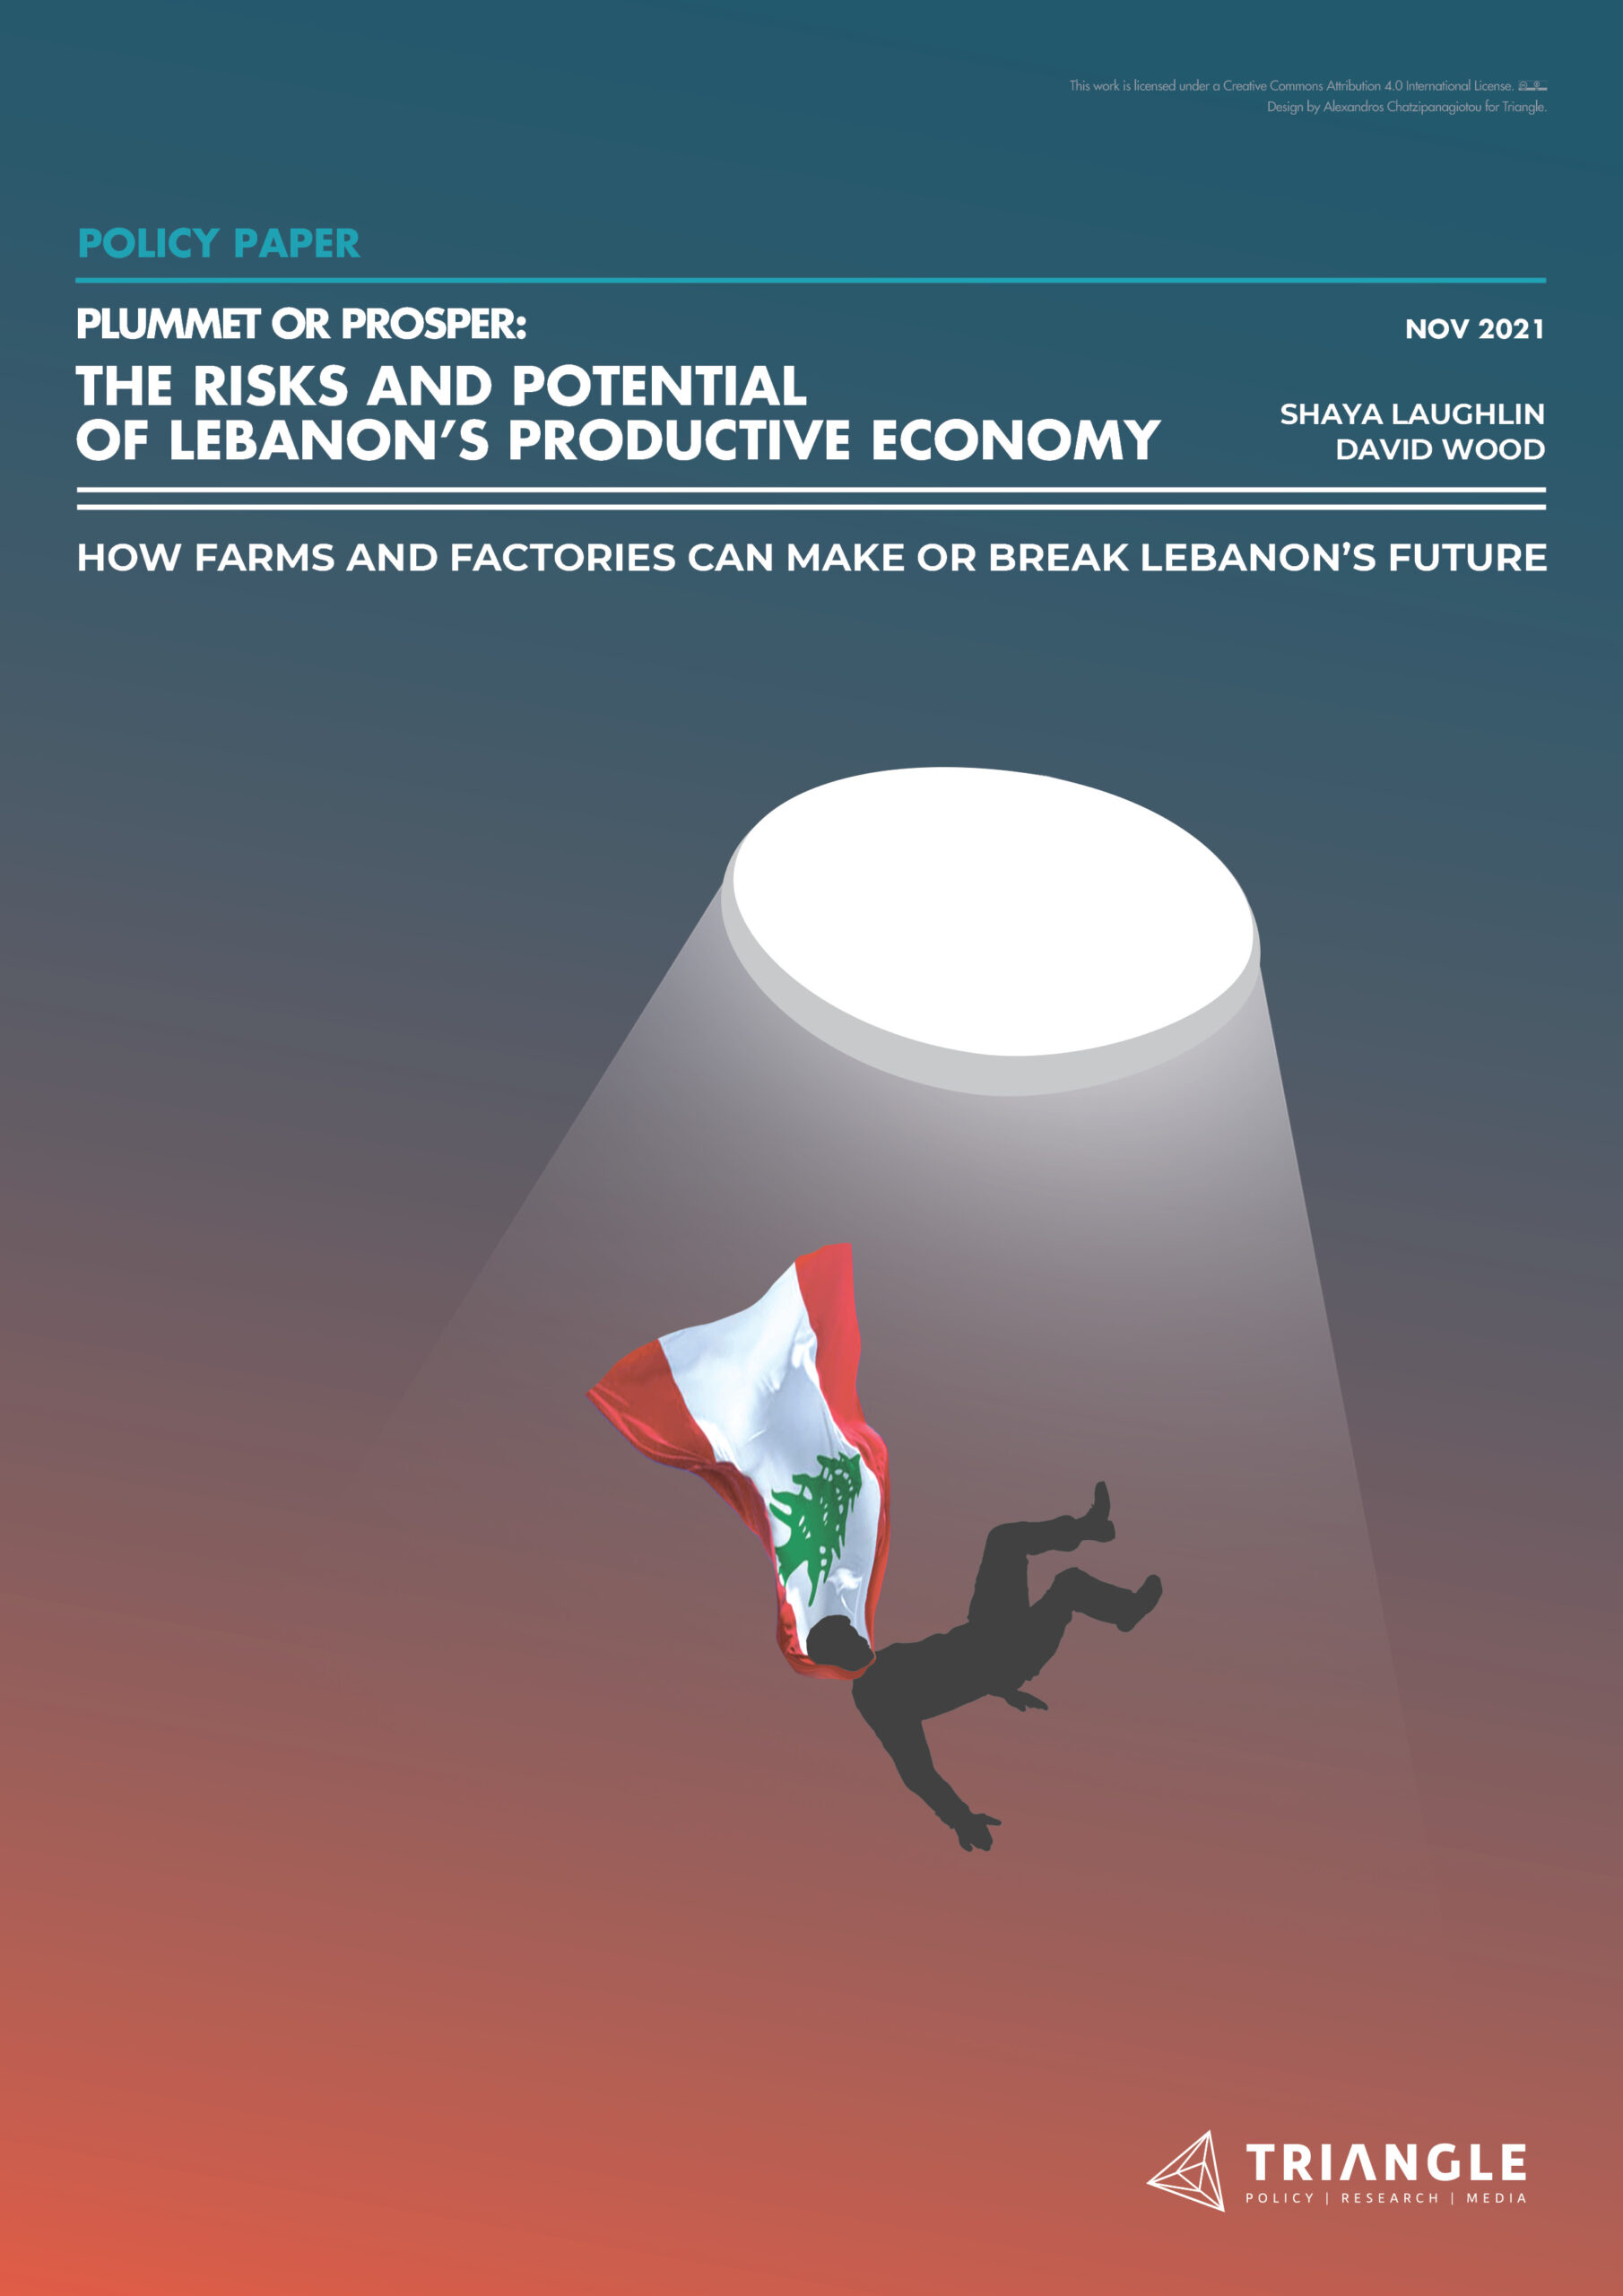 Risks and Potential Of Lebanon's Productive Economy